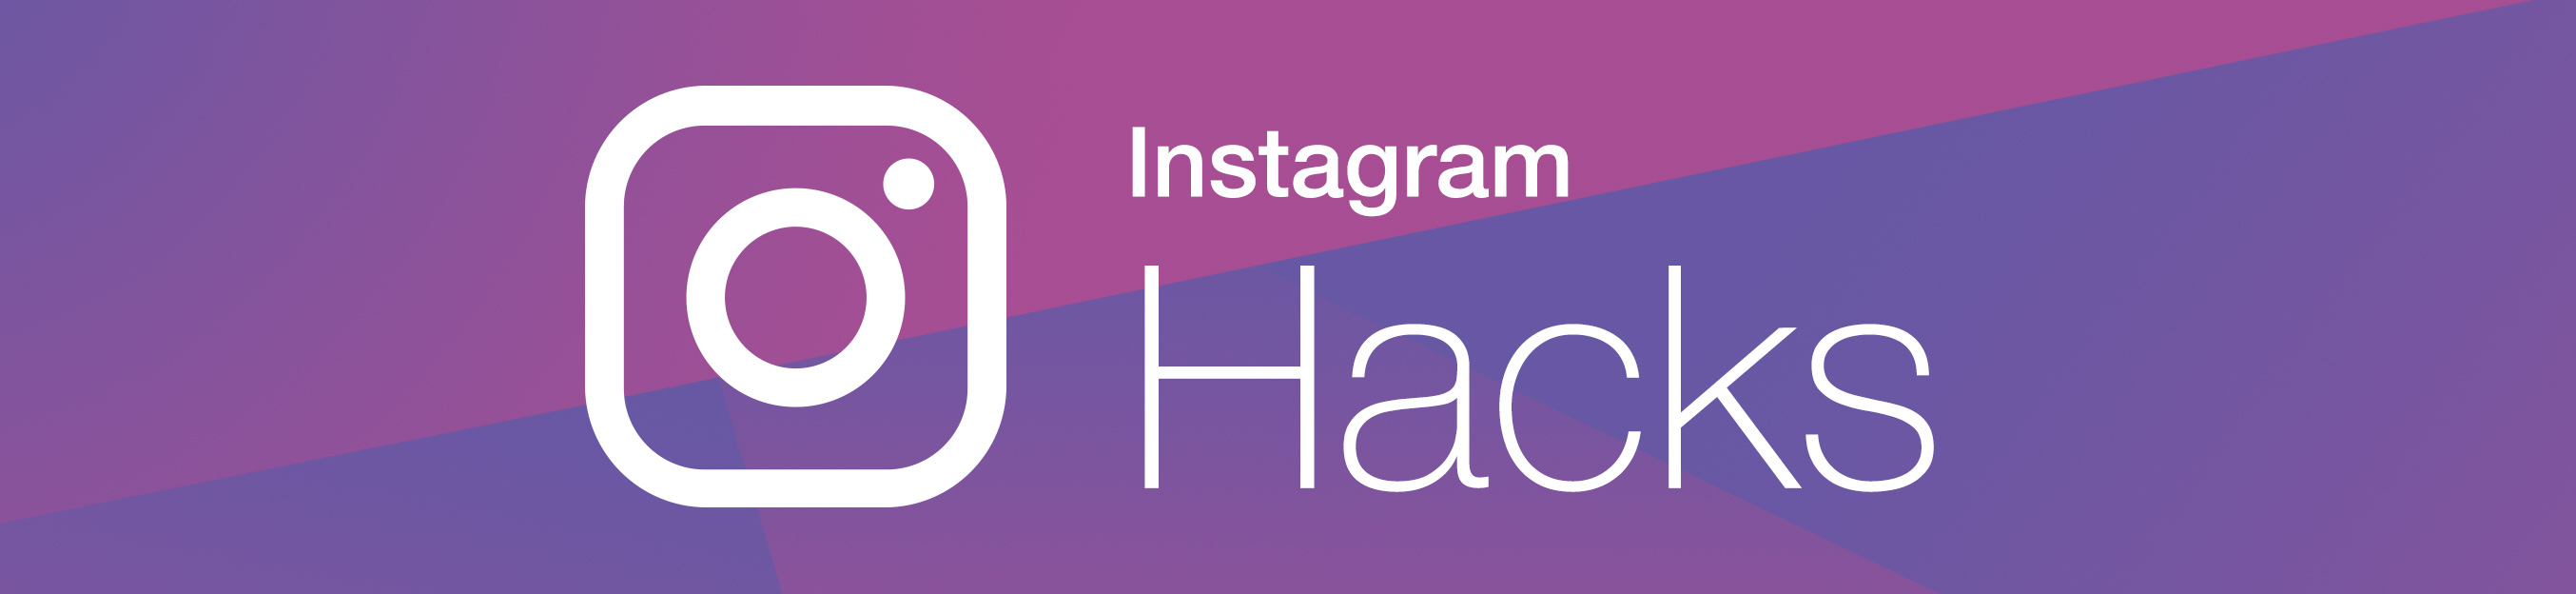 8 Instagram Hacks And Tips All Brands Should Know